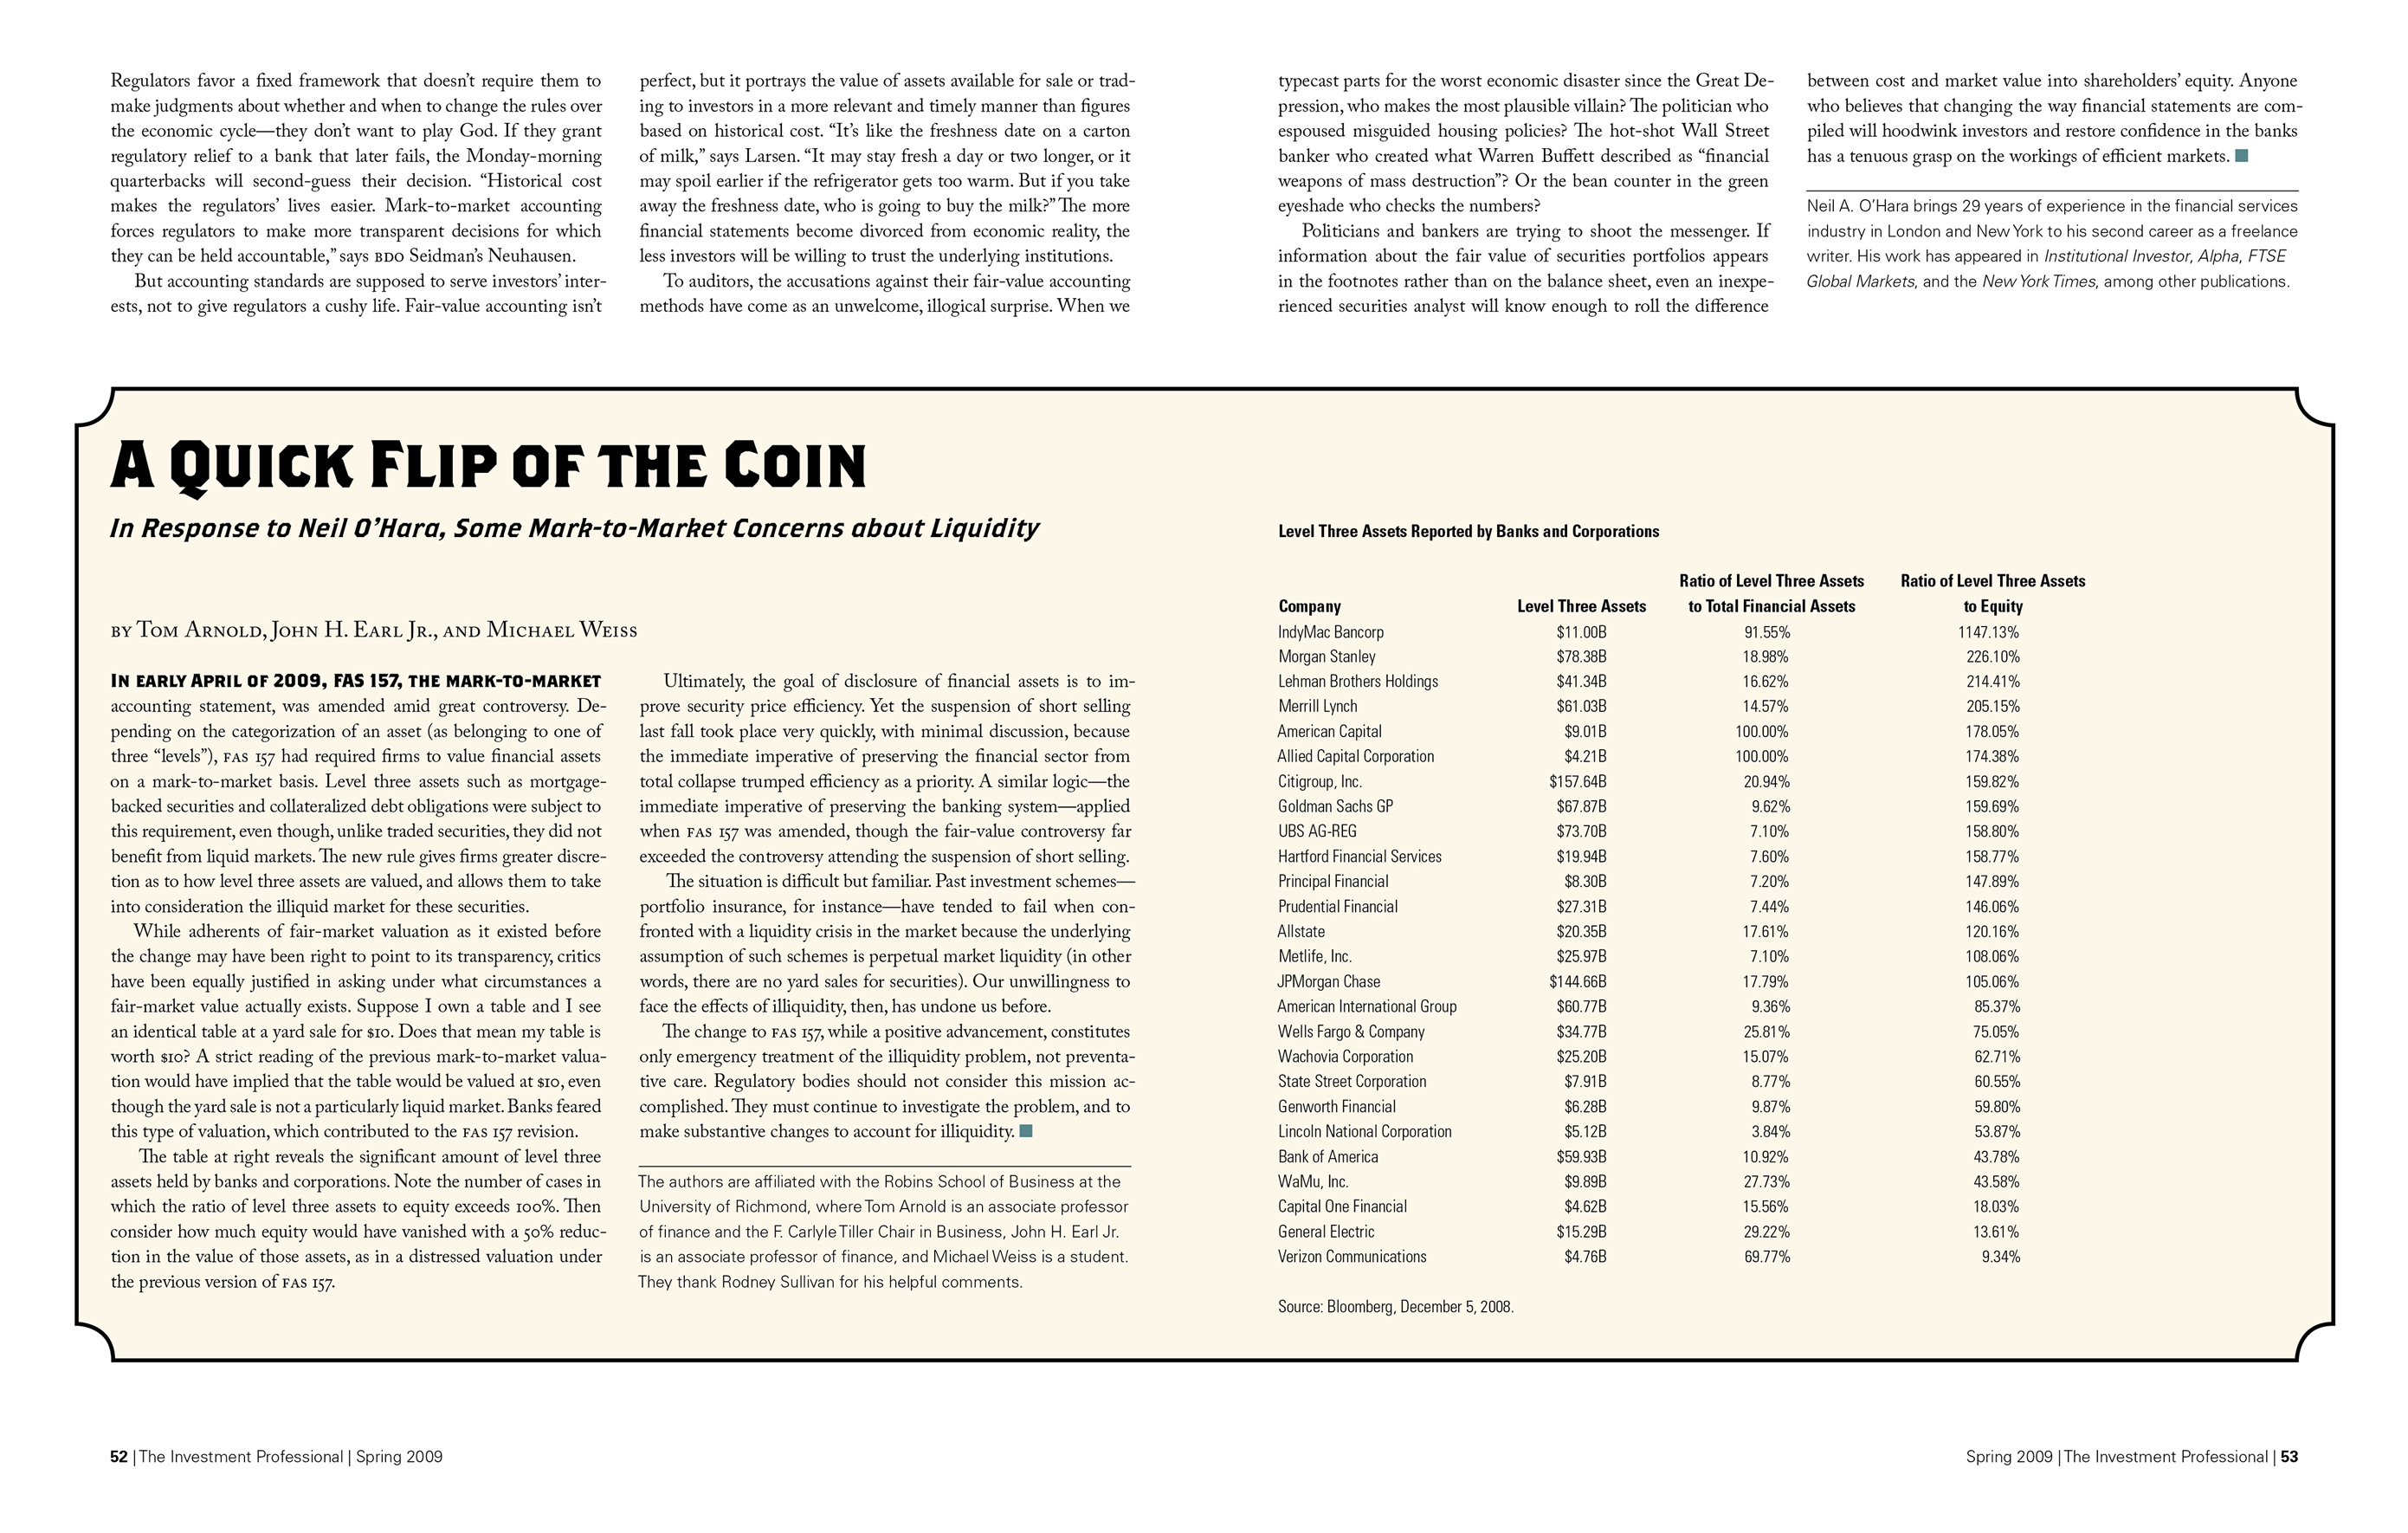 Fourth and final spread of the article titled 'Don’t Shoot the Messenger.' A sidebar styled like a billboard from the Old West discusses mark-to-market concerns about liquidity and includes a table on level-three assets reported by banks and corporations.